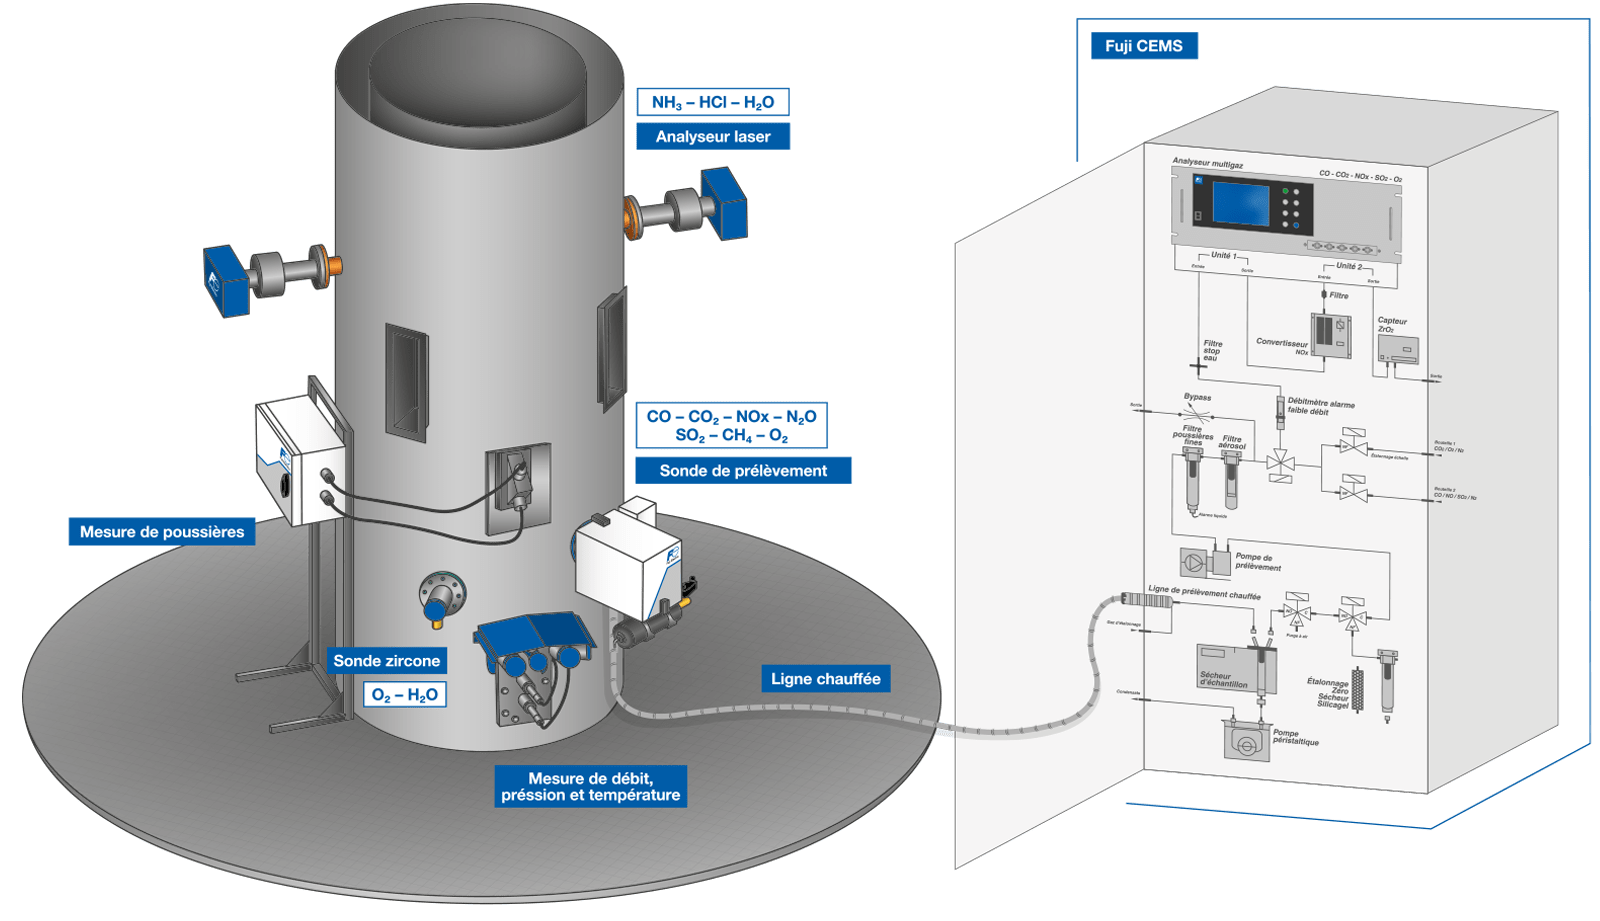 Diagram of the Continuous Emissions Monitoring System
